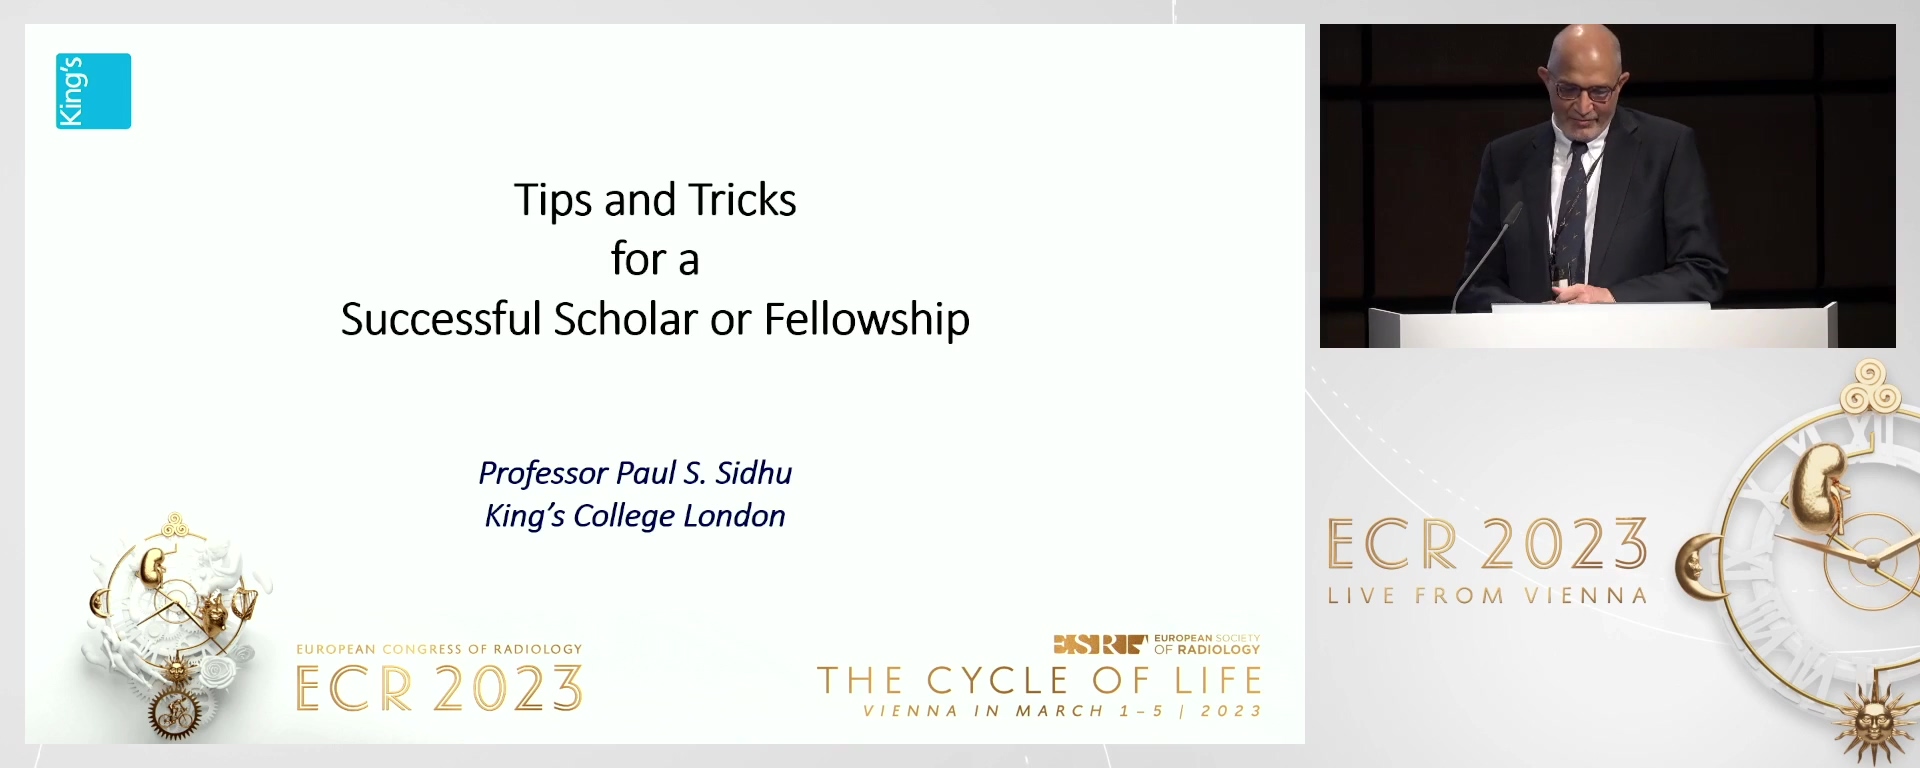 Tips and tricks for a successful scholar-/fellowship - Paul S.  Sidhu, London / UK